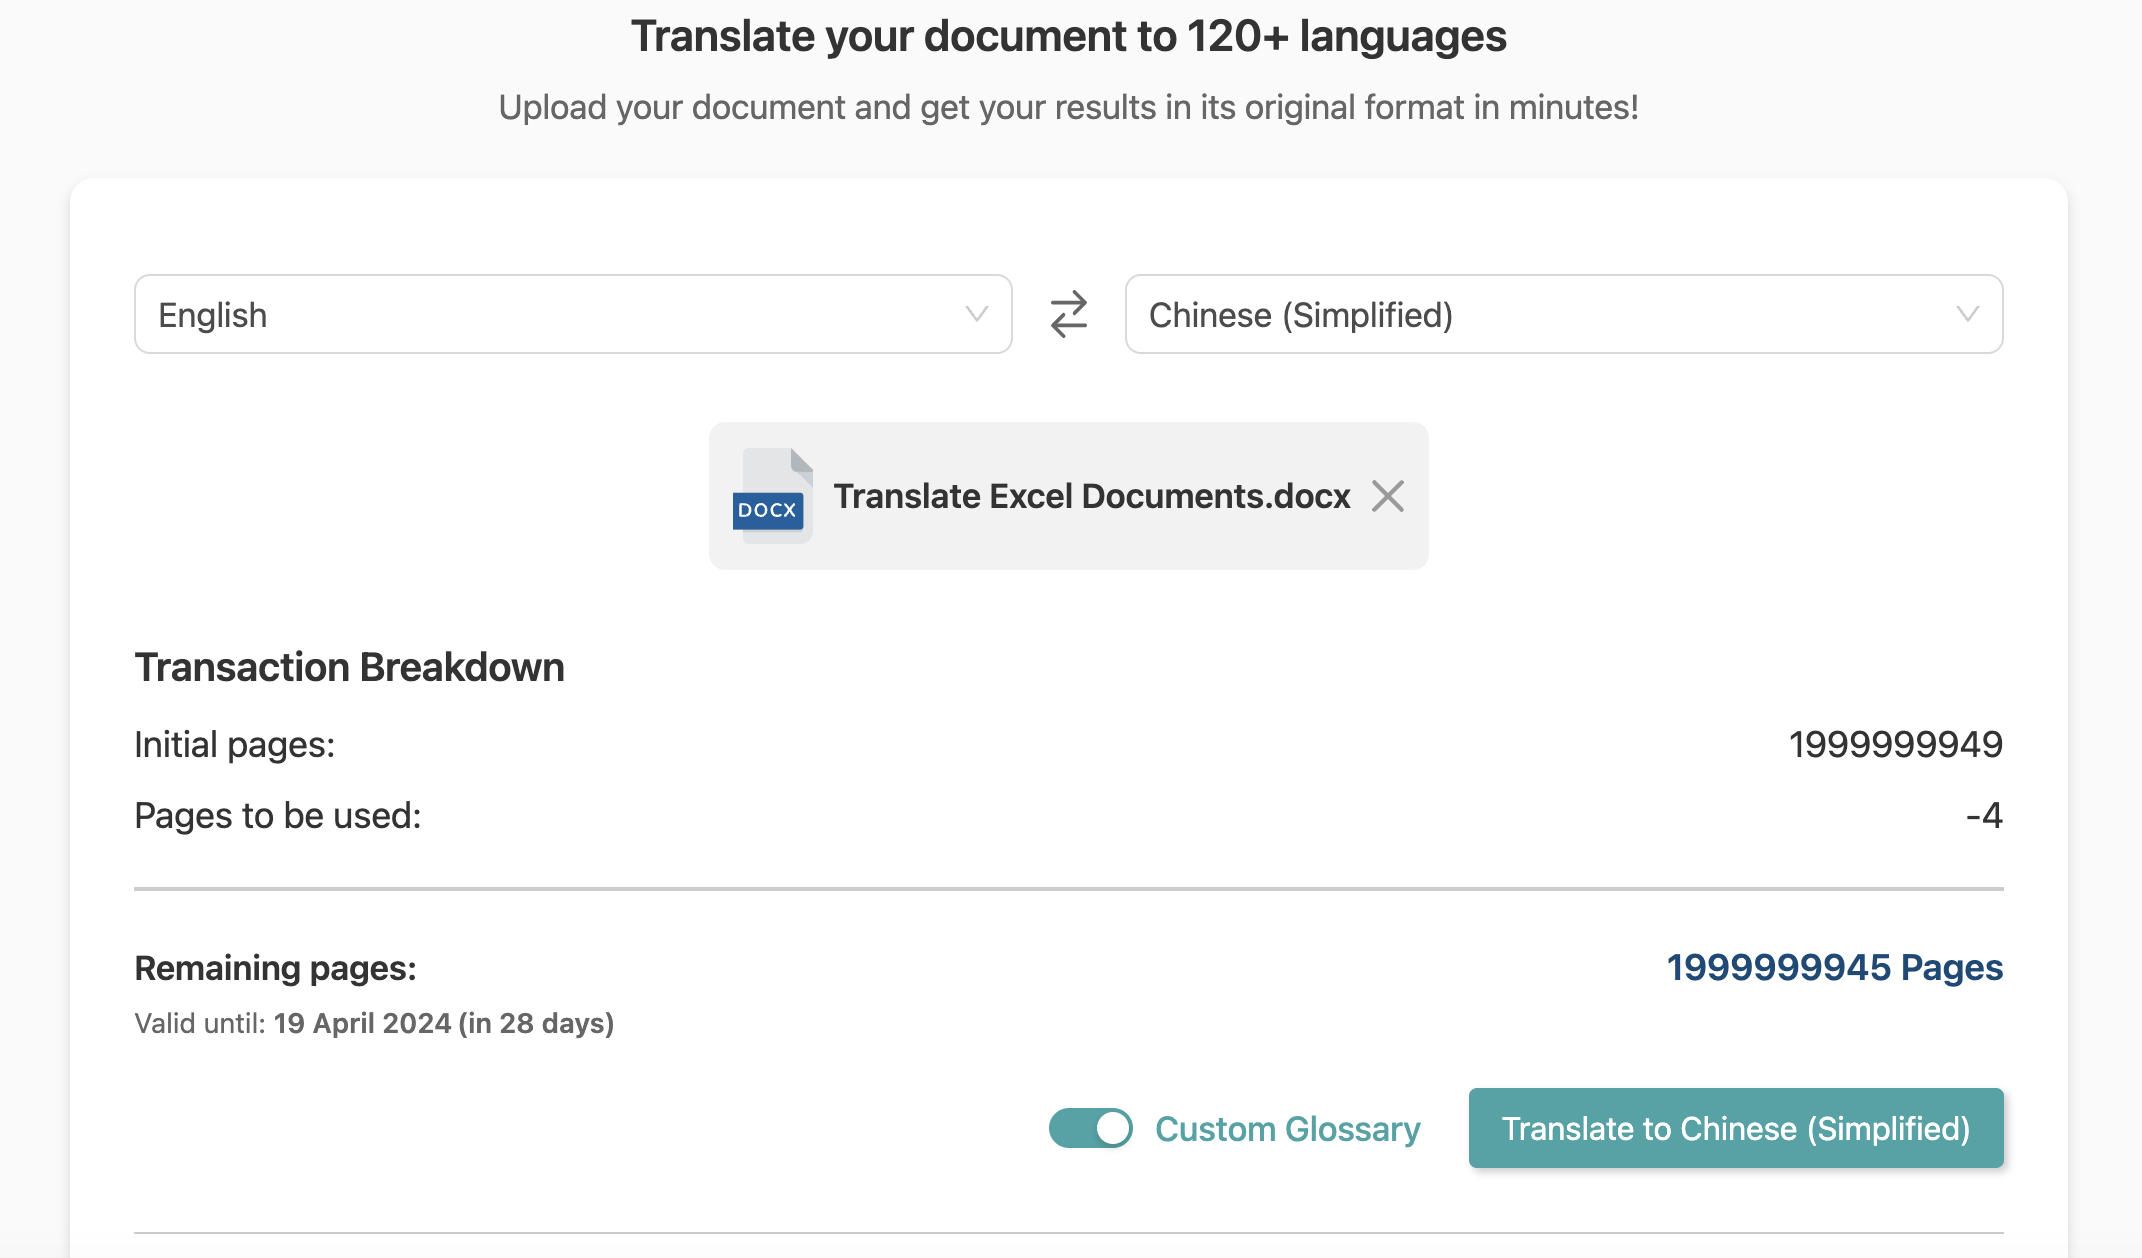 Upload document you want to translate